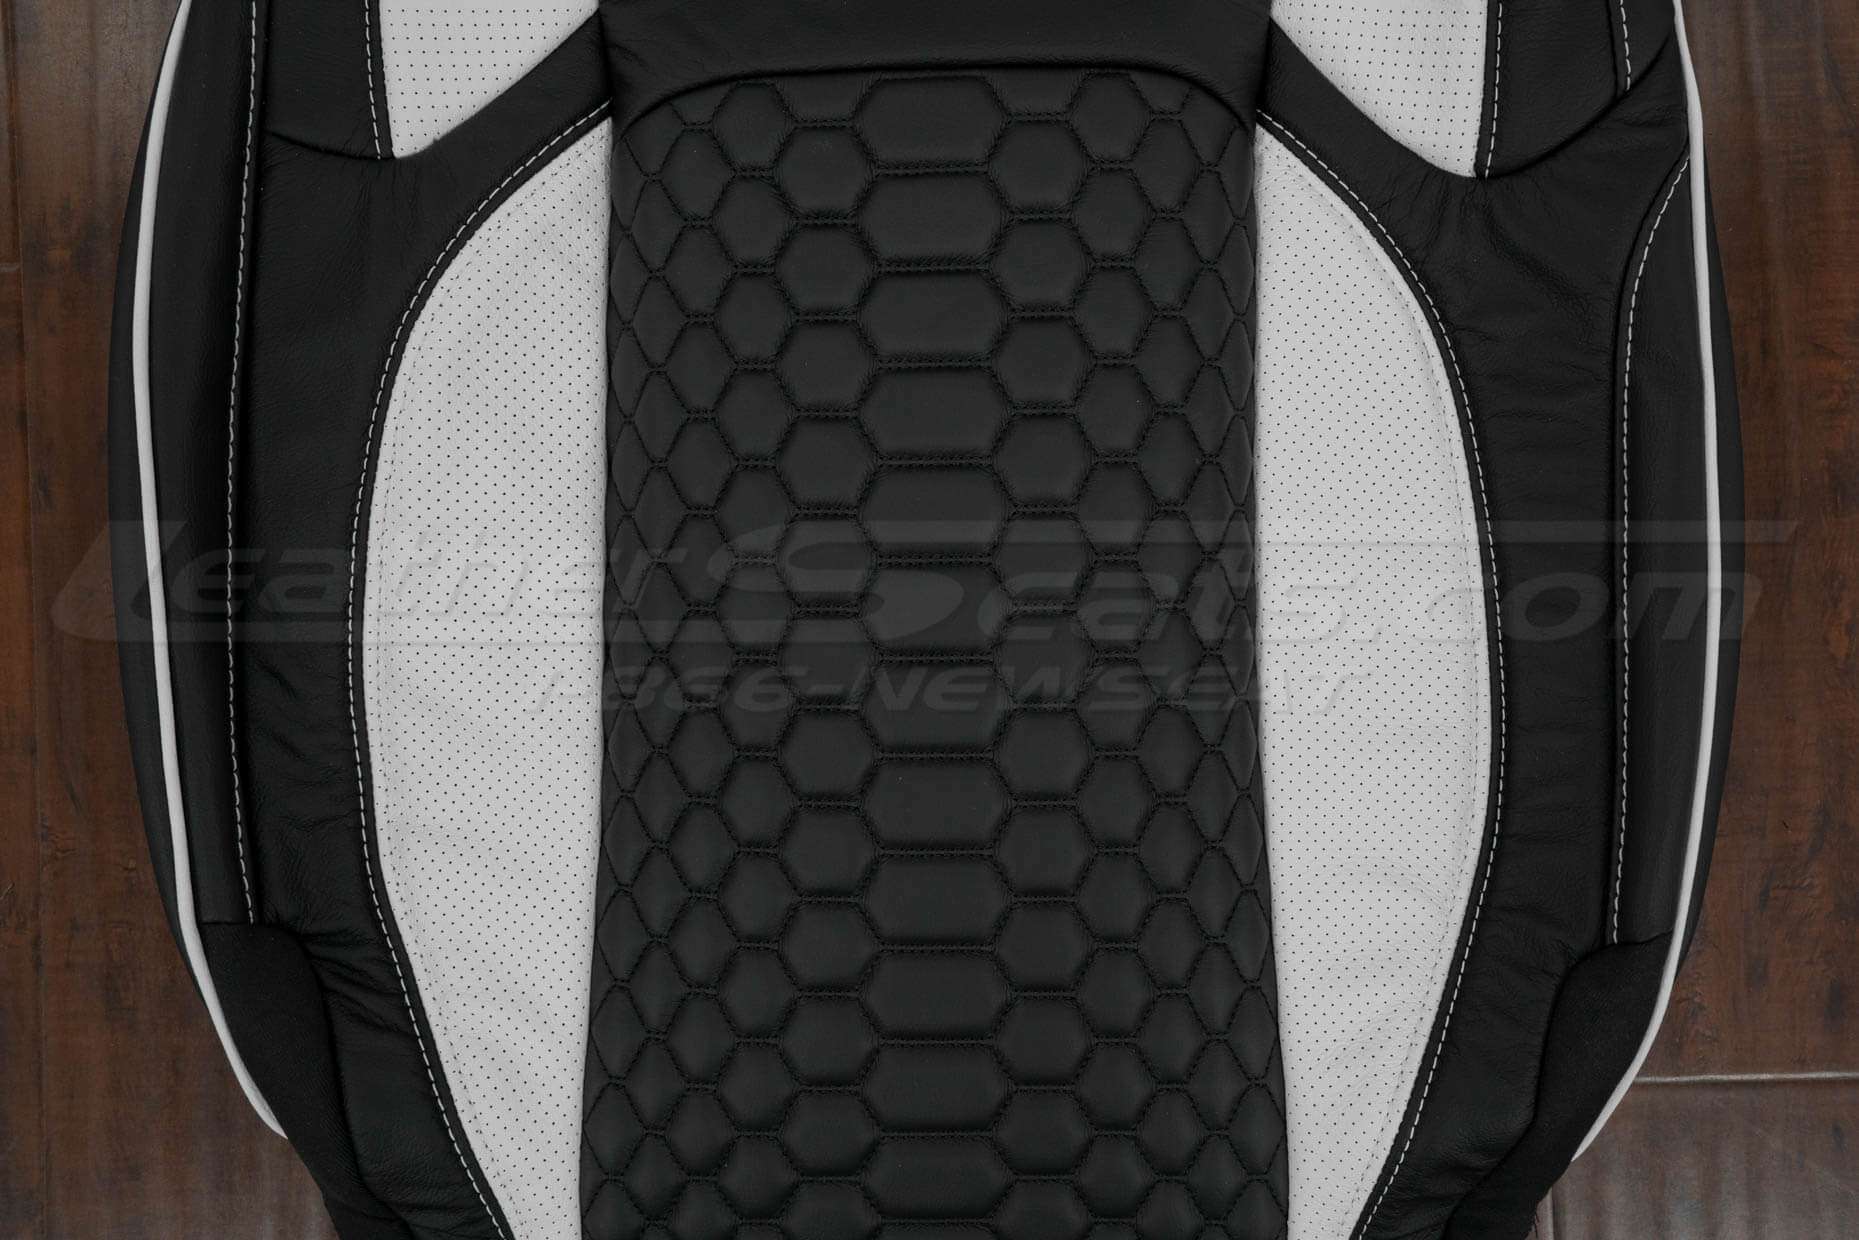 Bottom section of front backrest with convex reticulated hex and perforated wings